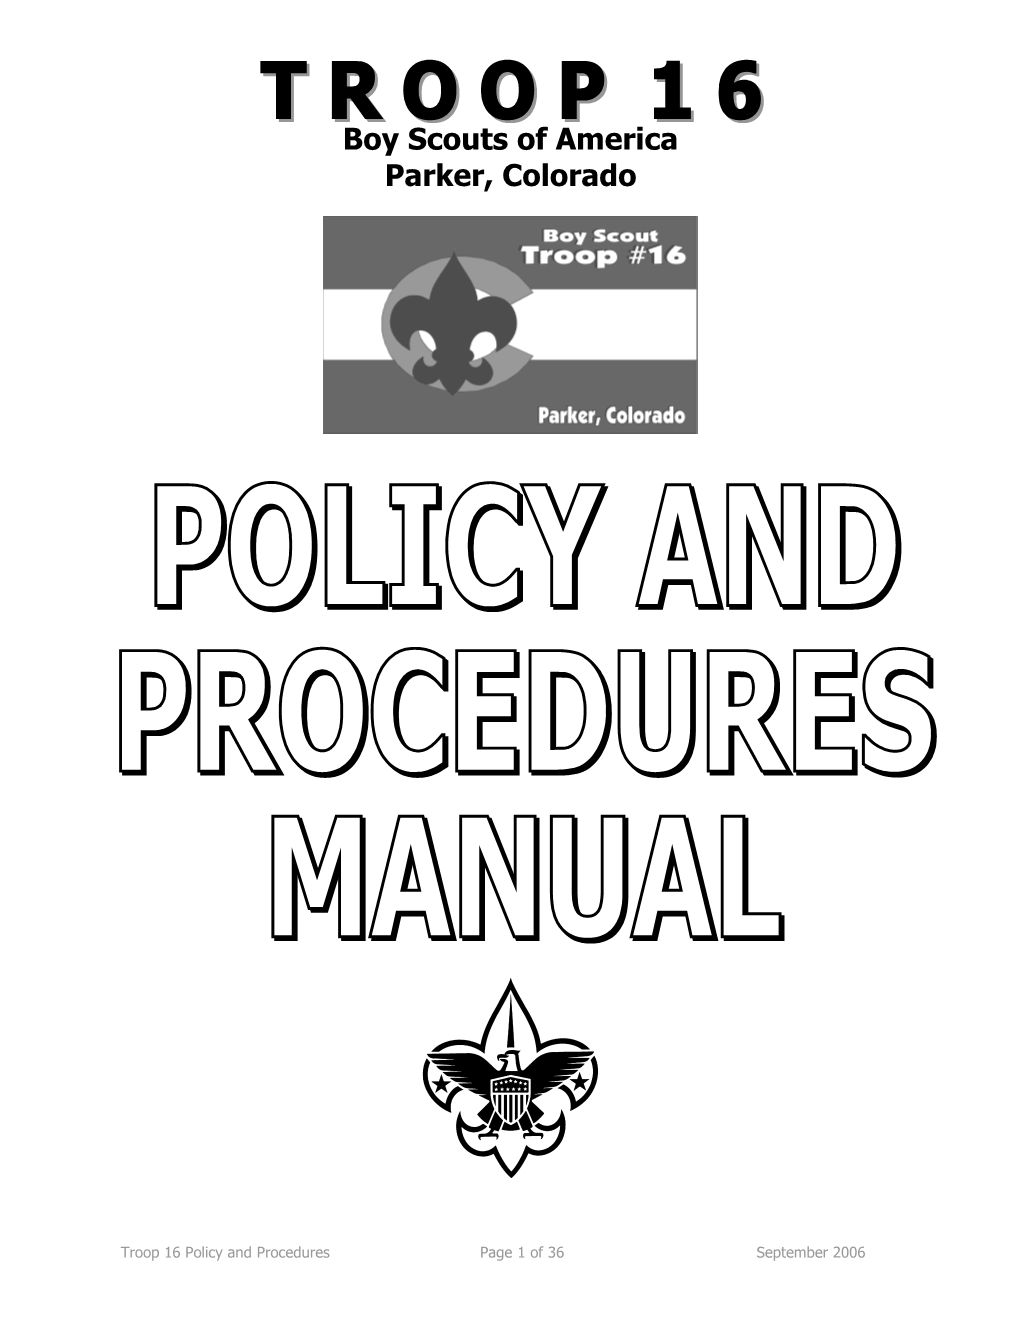 How to Use This Policy and Procedure Manual